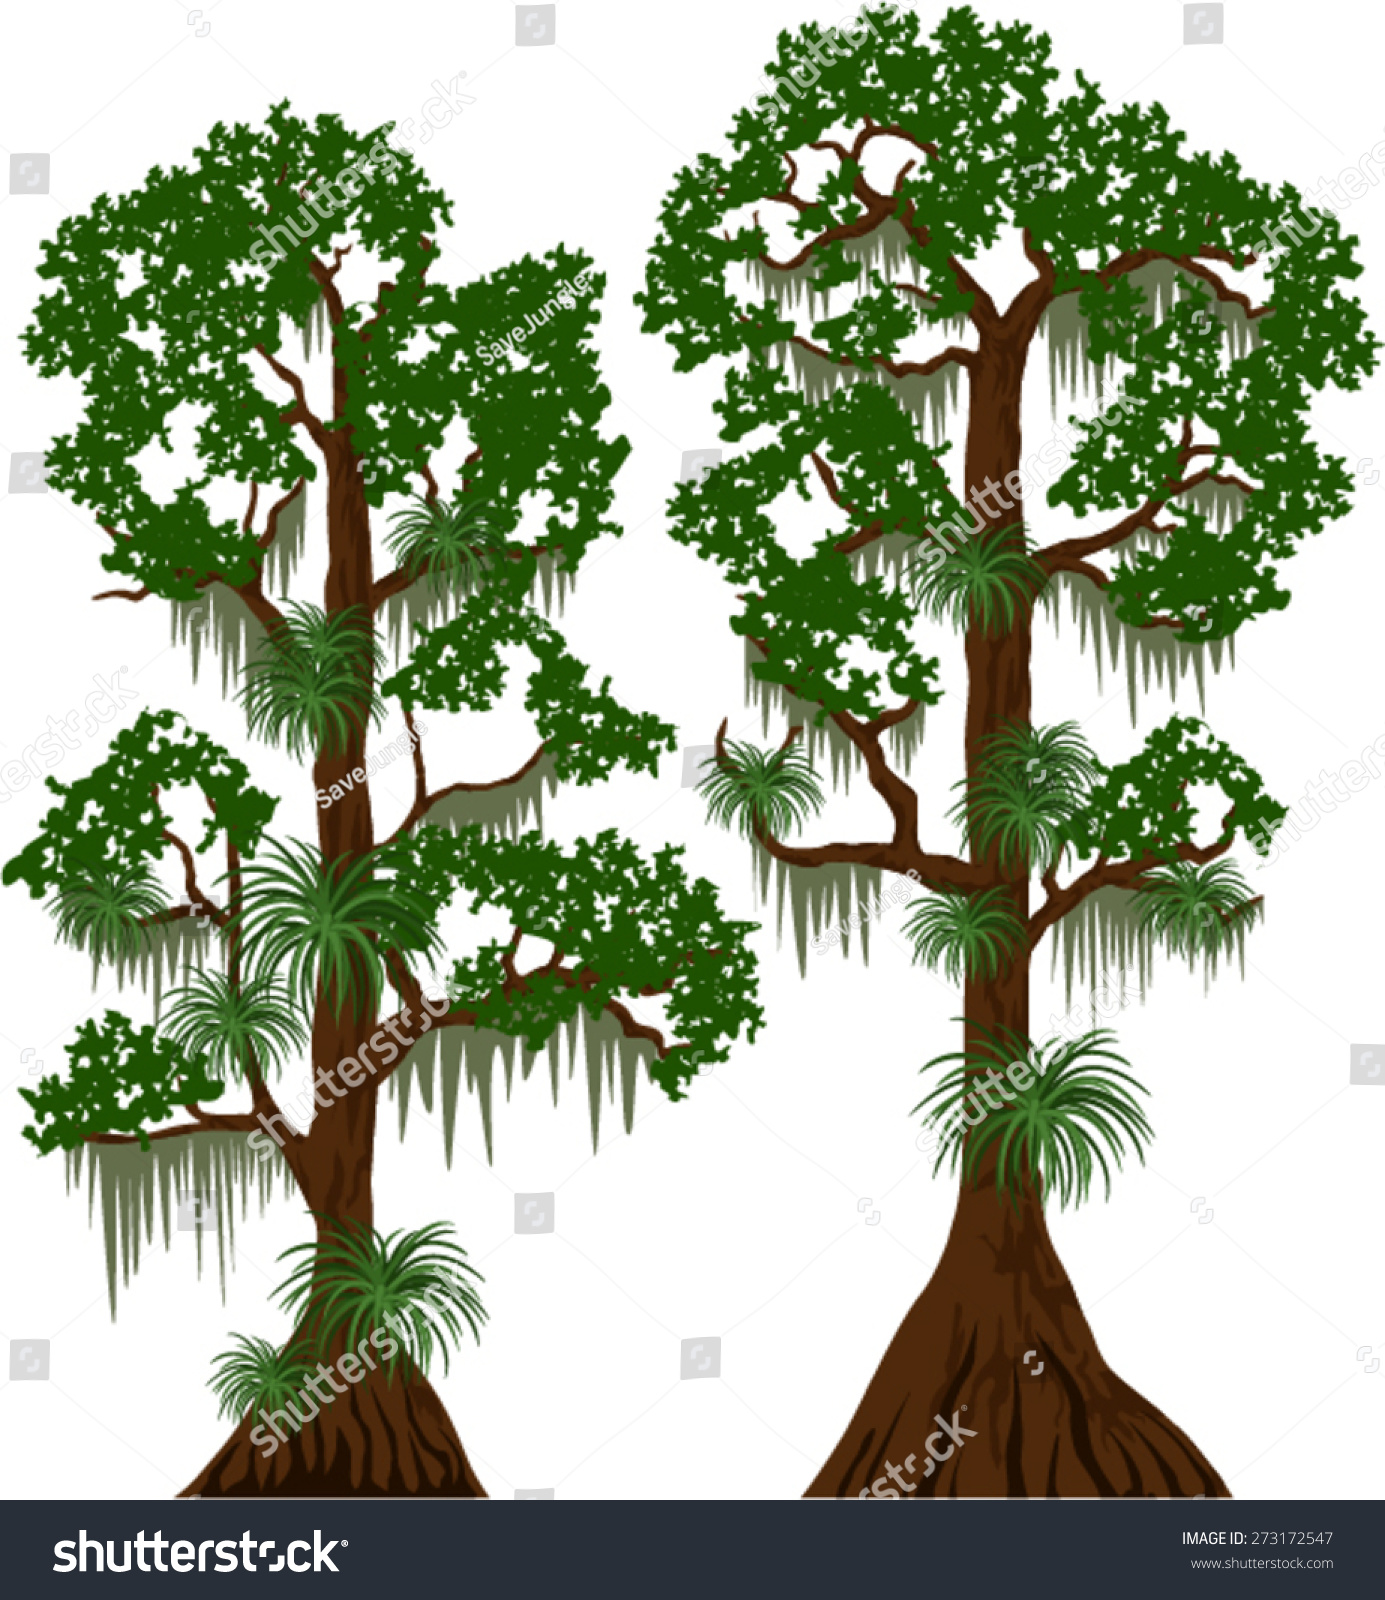 SVG of vector cypress trees with Spanish moss svg